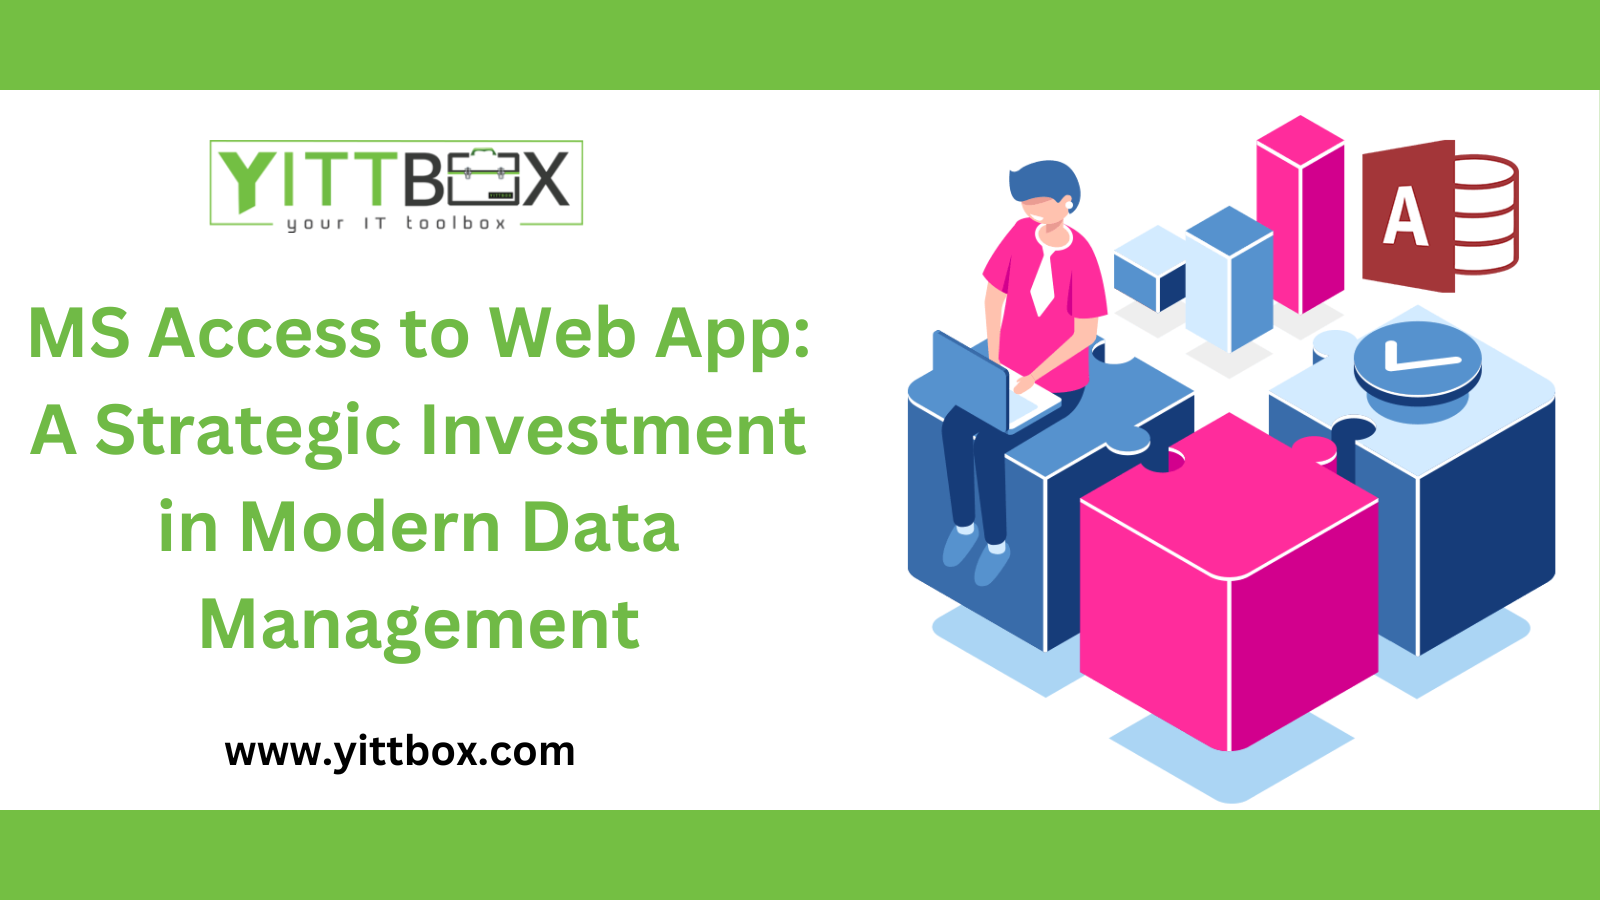 MS Access to Web App: A Strategic Investment in Modern Data Management